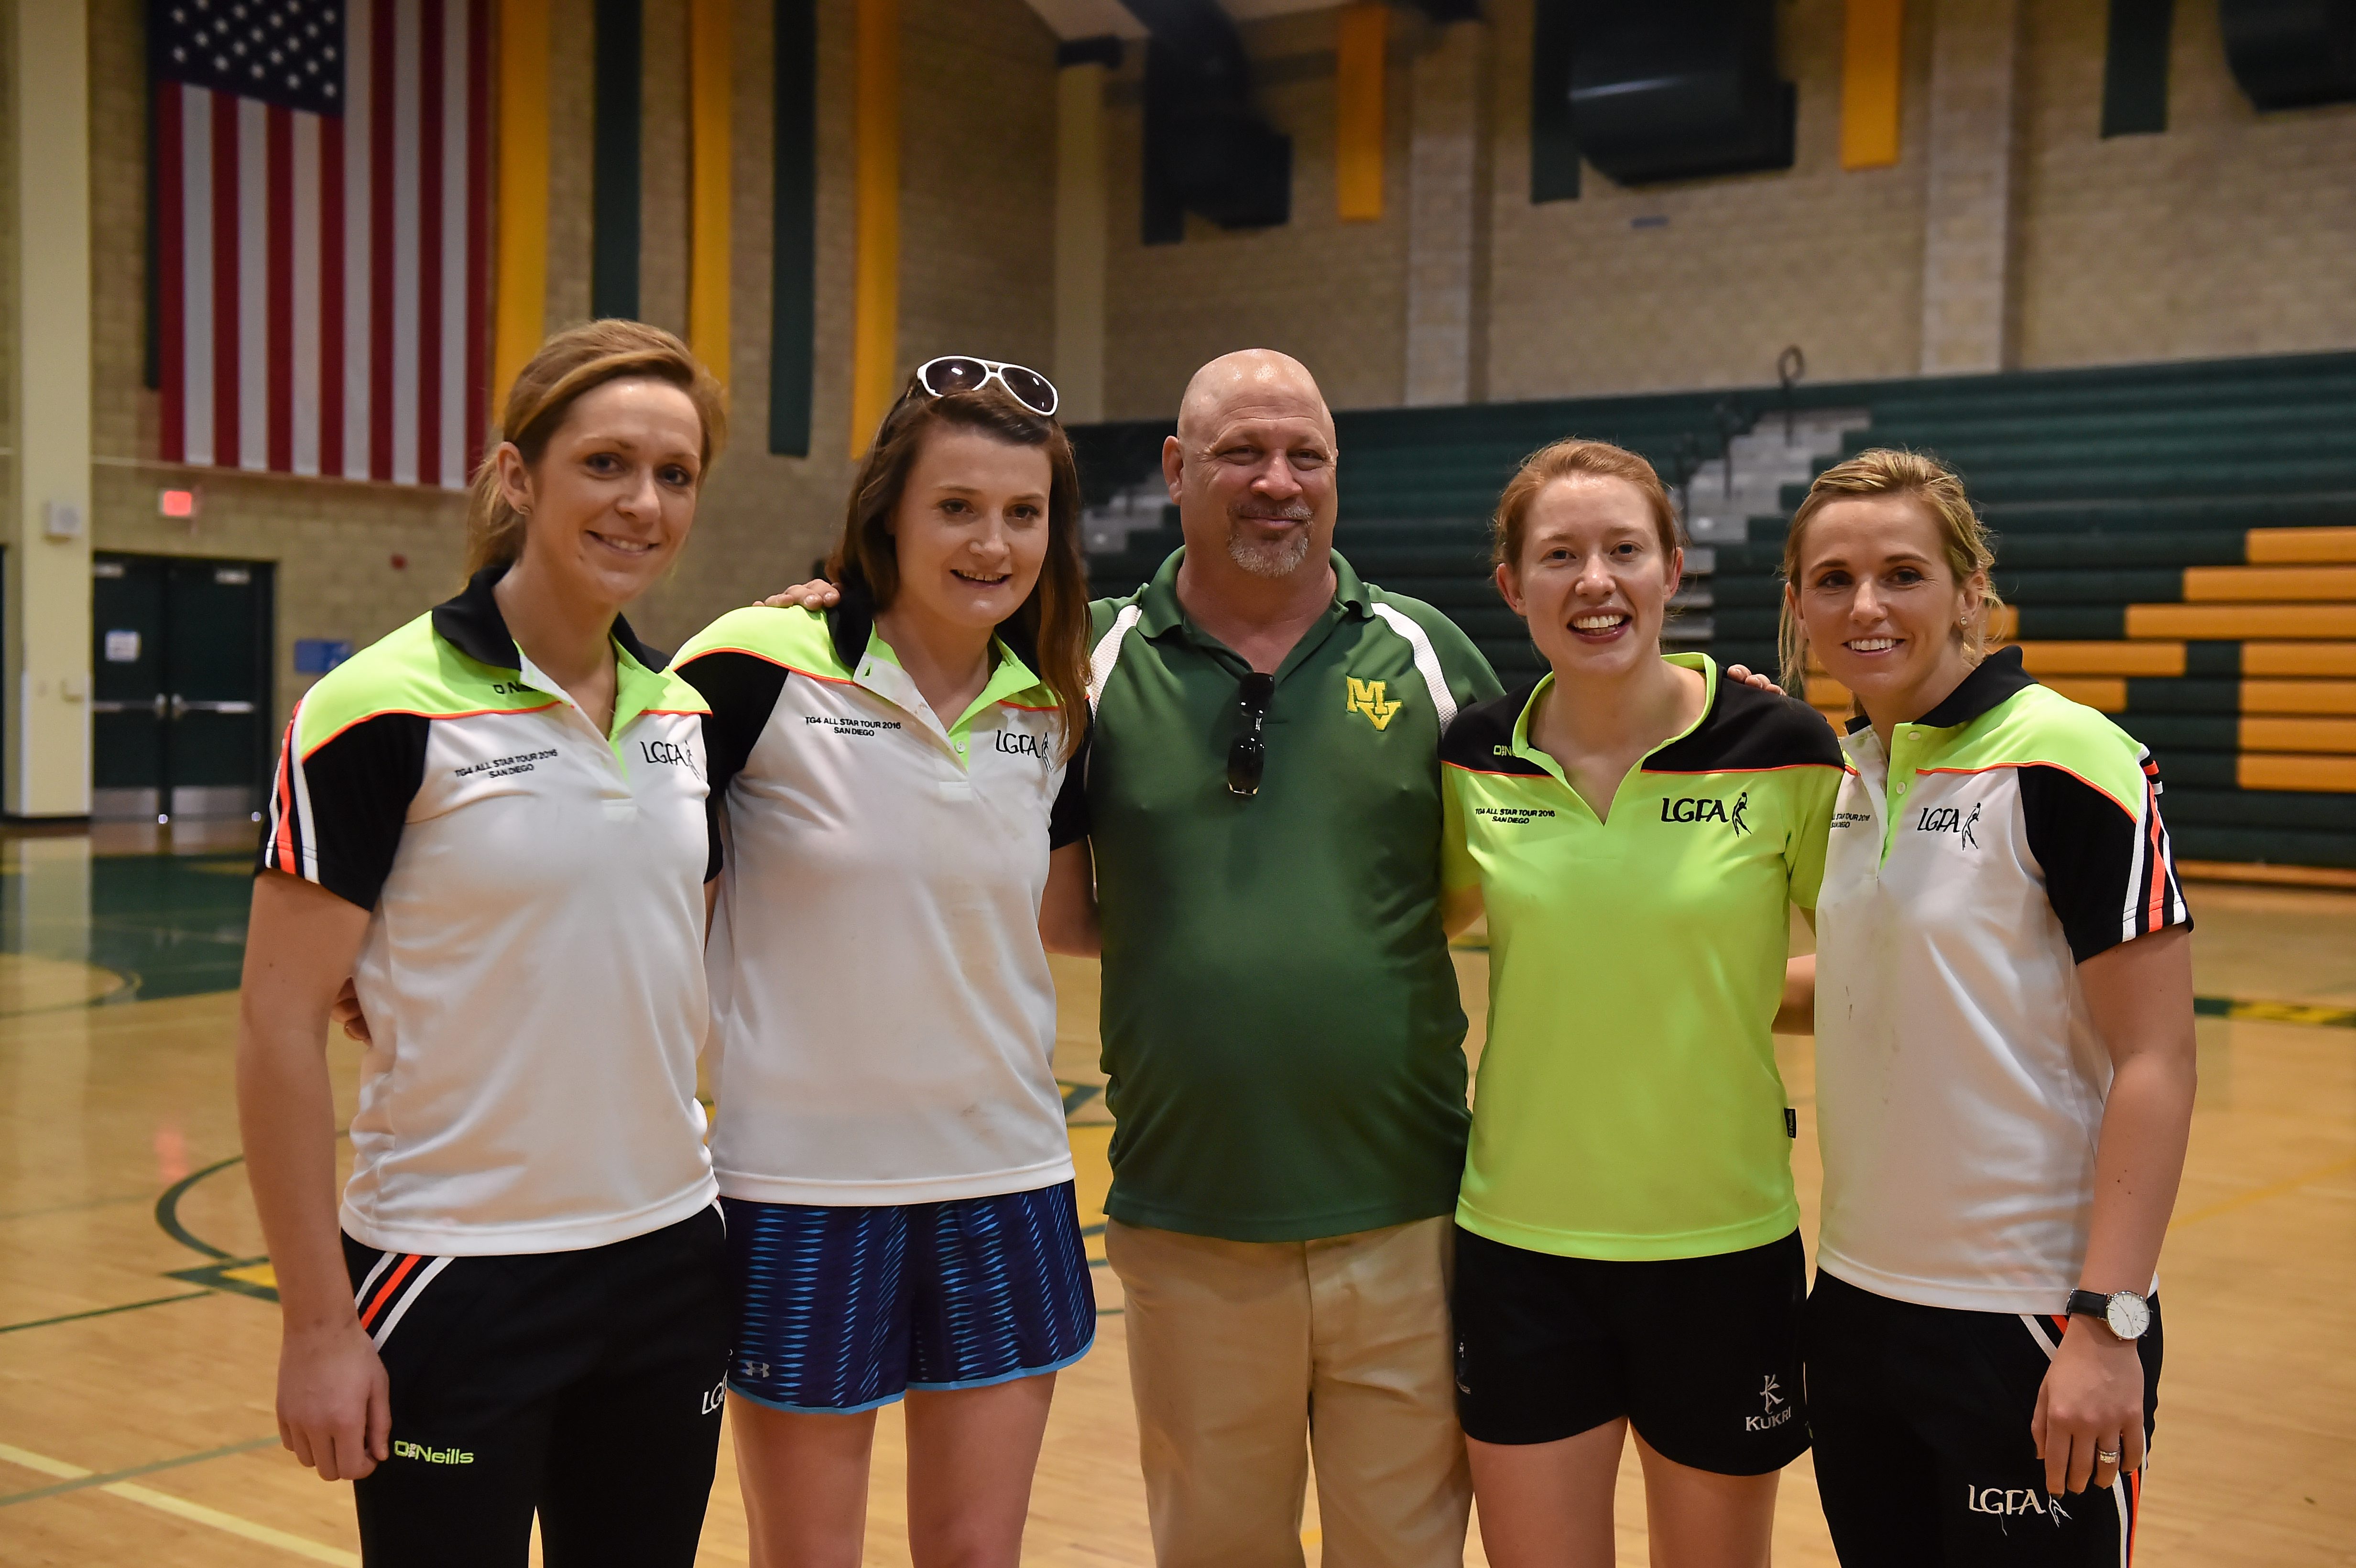 17 March 2016; TG4 LGFA All Stars Caroline O'Hanlon, Armagh, Sinead Kernan, Armagh, Annie Walsh, Cork, and Rena Buckley, Cork, after a demonstration of Ladies Football to students from Mar Vista High School. TG4 Ladies Football All-Star Tour, Mar Vista High School, Imperial Beach. California, USA. Picture credit: Brendan Moran / SPORTSFILE *** NO REPRODUCTION FEE ***